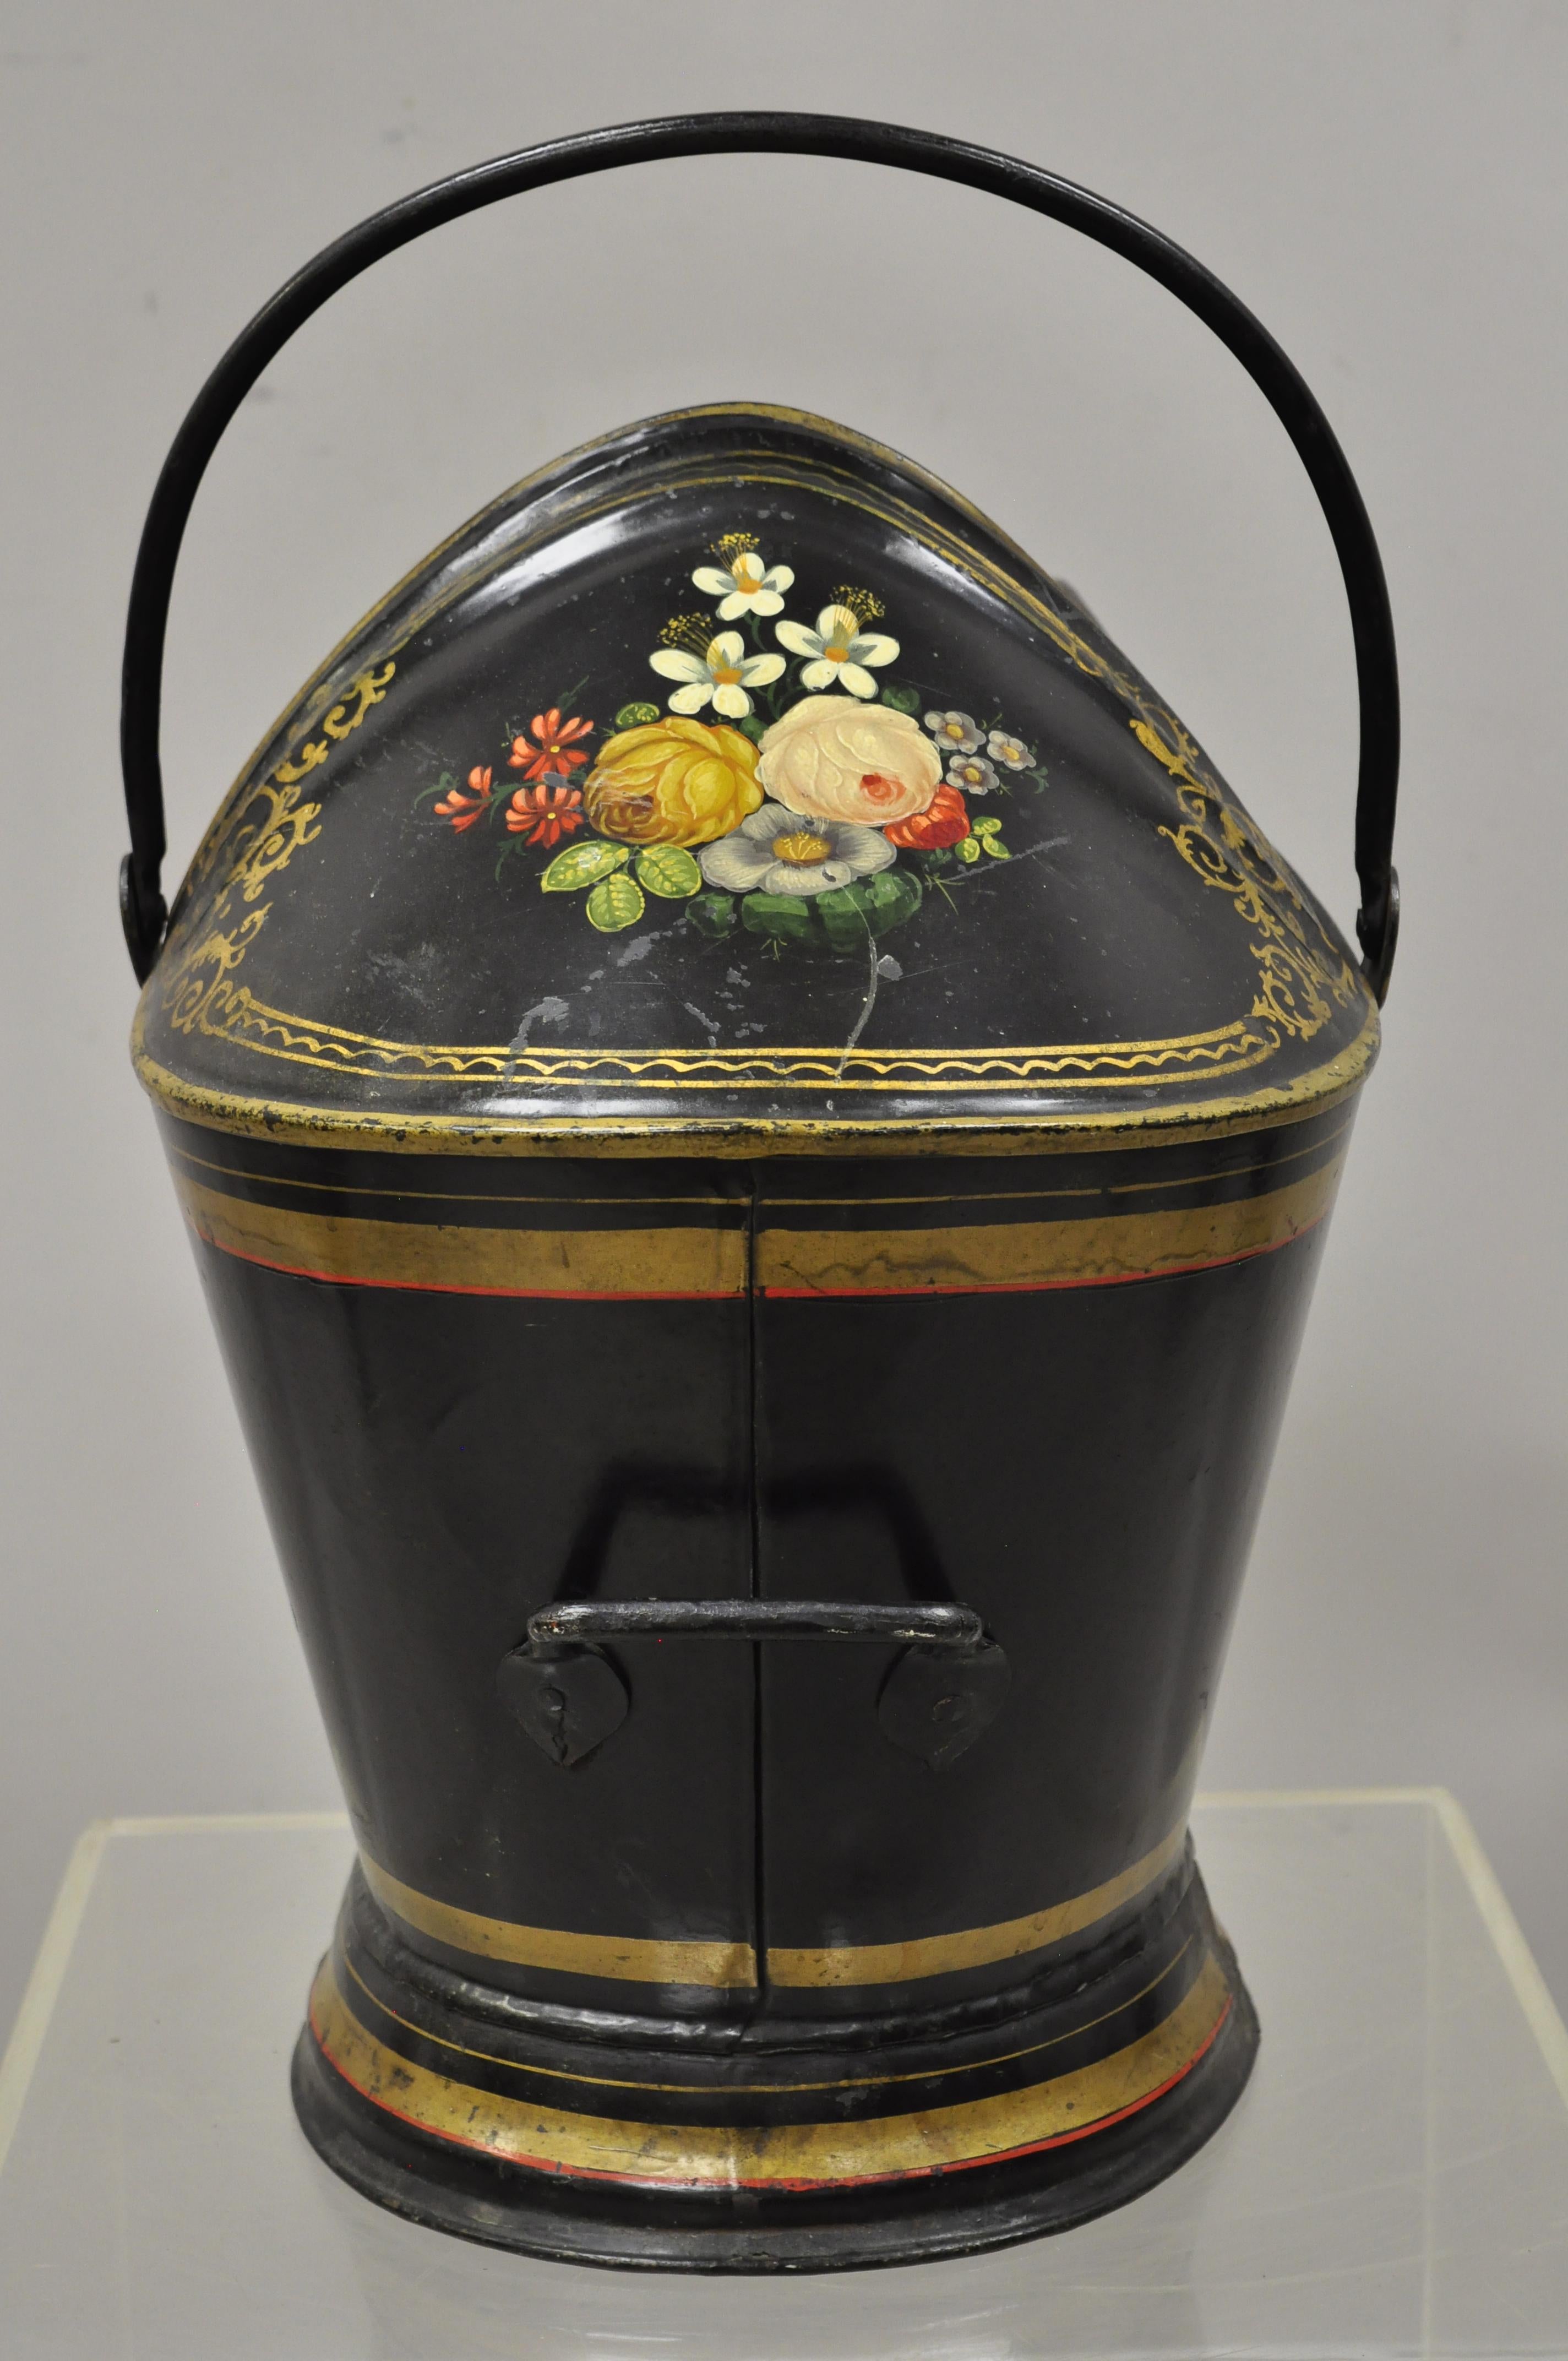 Antique Victorian black steel hand painted flower tole metal coal scuttle bucket. Item features hand painted flower details, steel metal construction, very nice antique item, circa late 19th-early 20th century. Measurements: 20